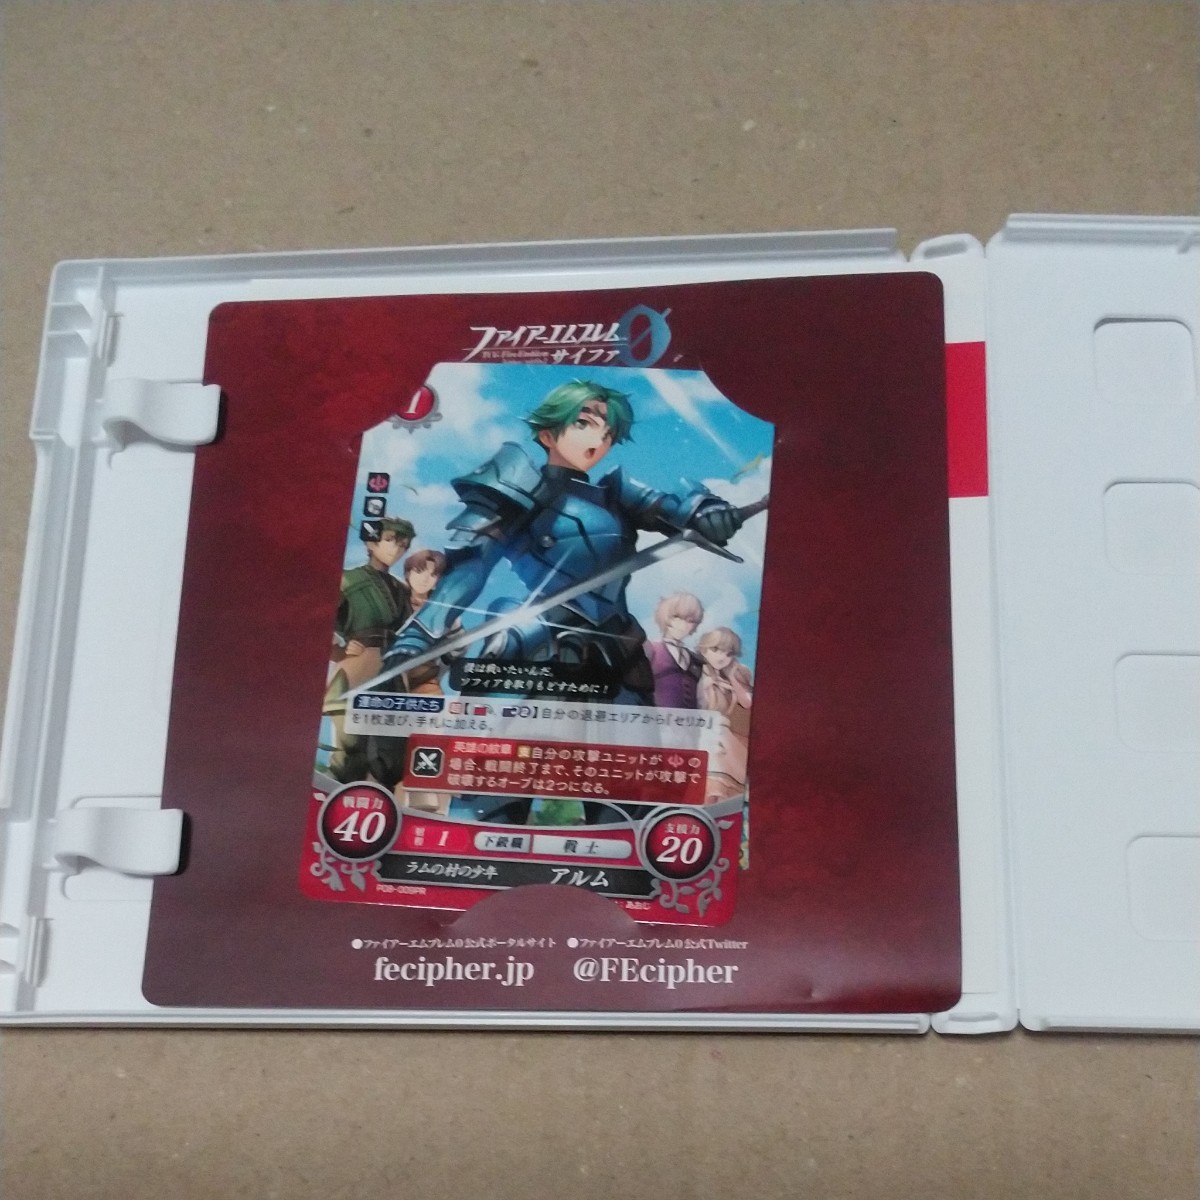 3DS ファイアーエムブレムEchoesもうひとりの英雄王 LIMITED EDITION